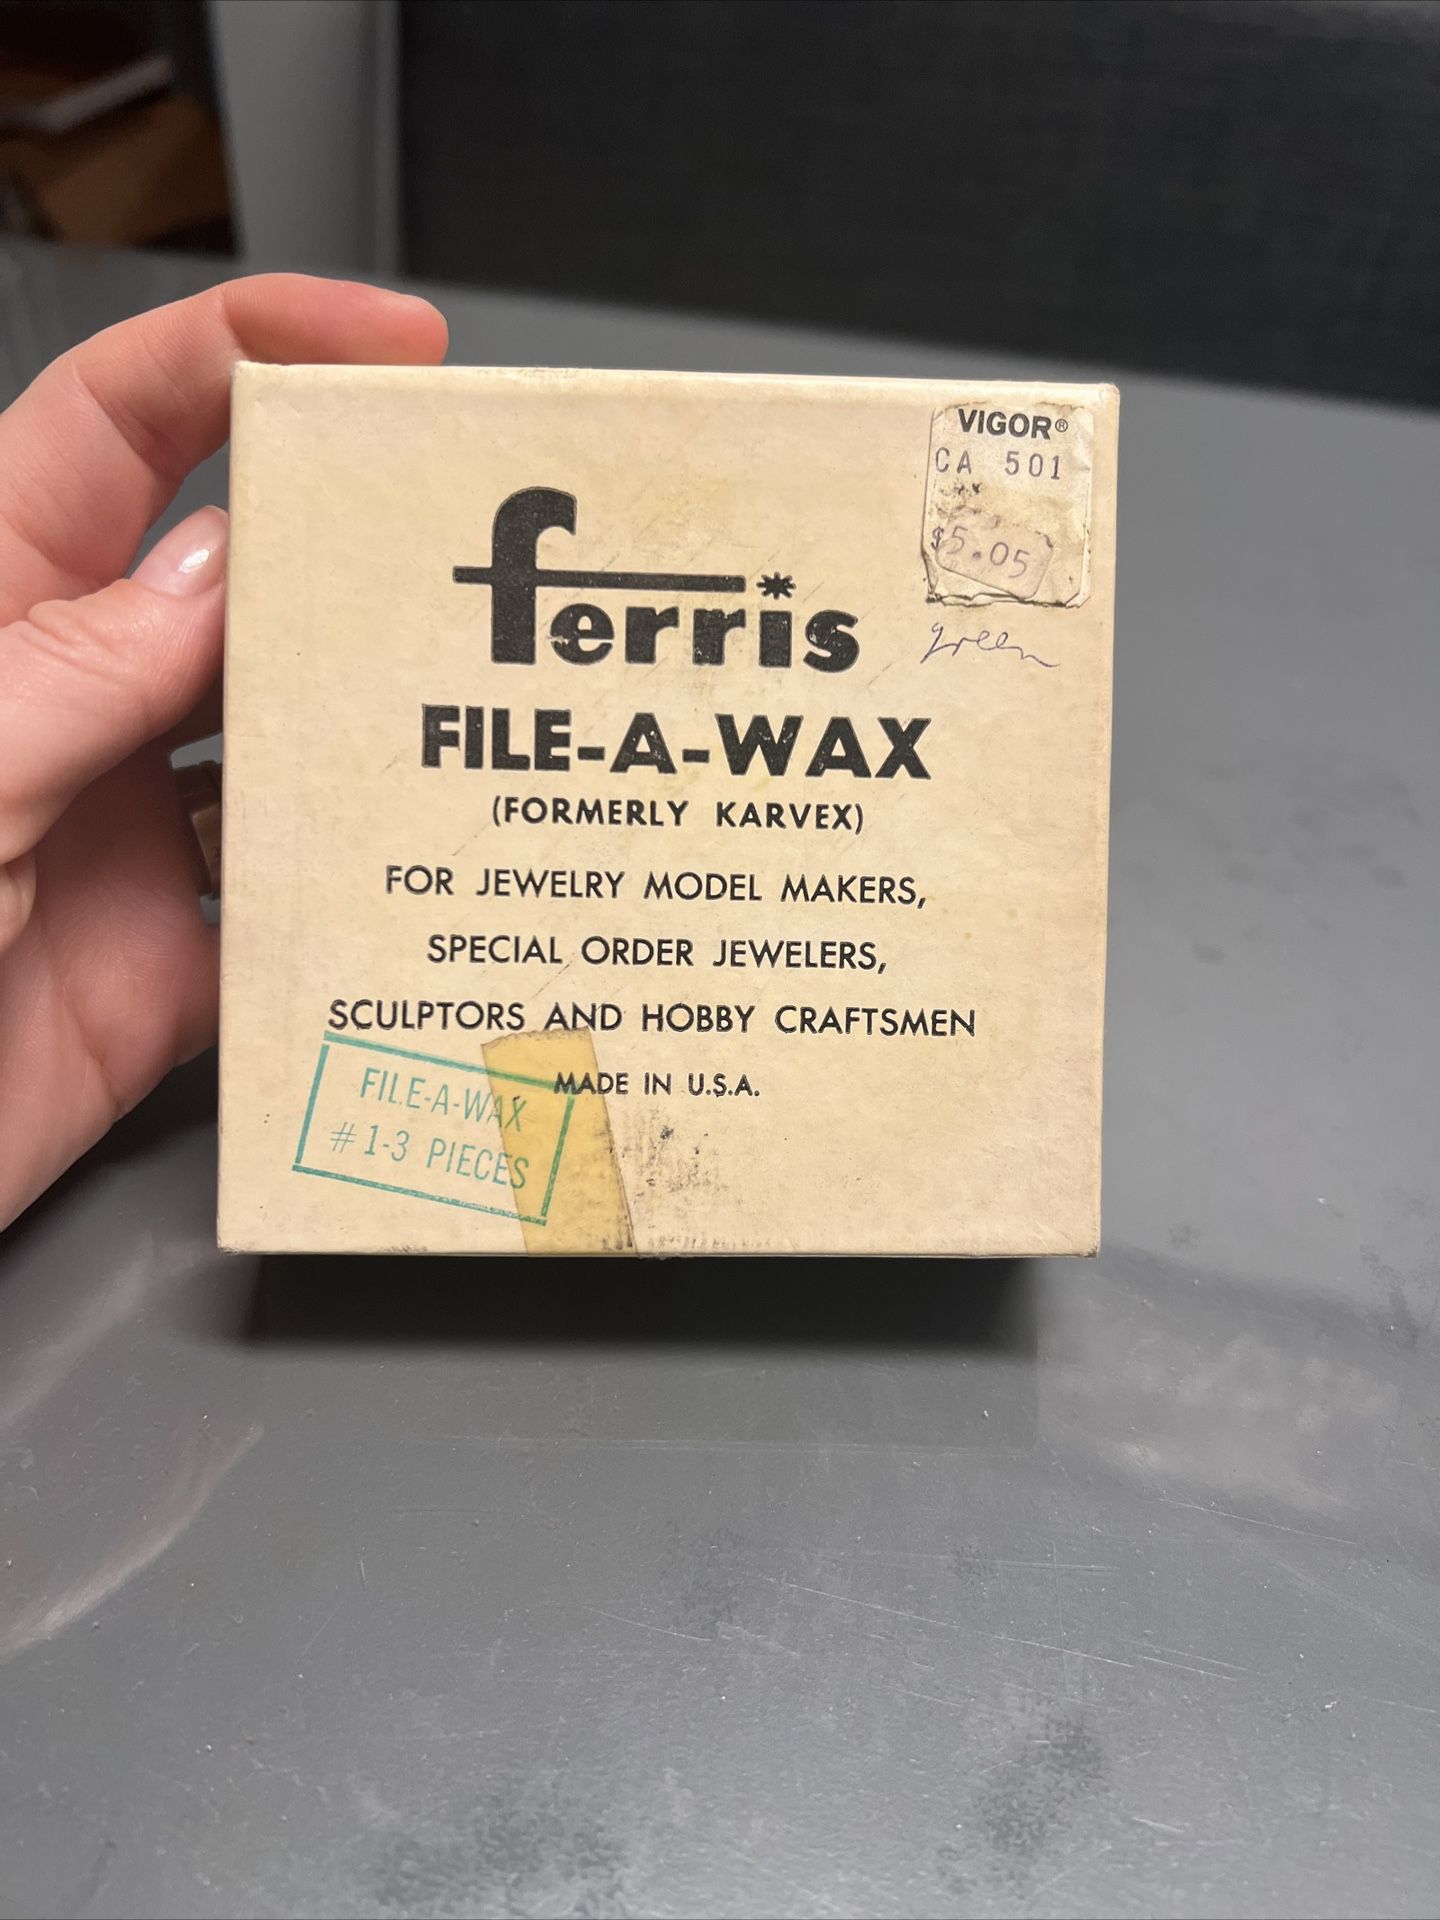 Ferris File-A-Wax for Jewelry Model Makers